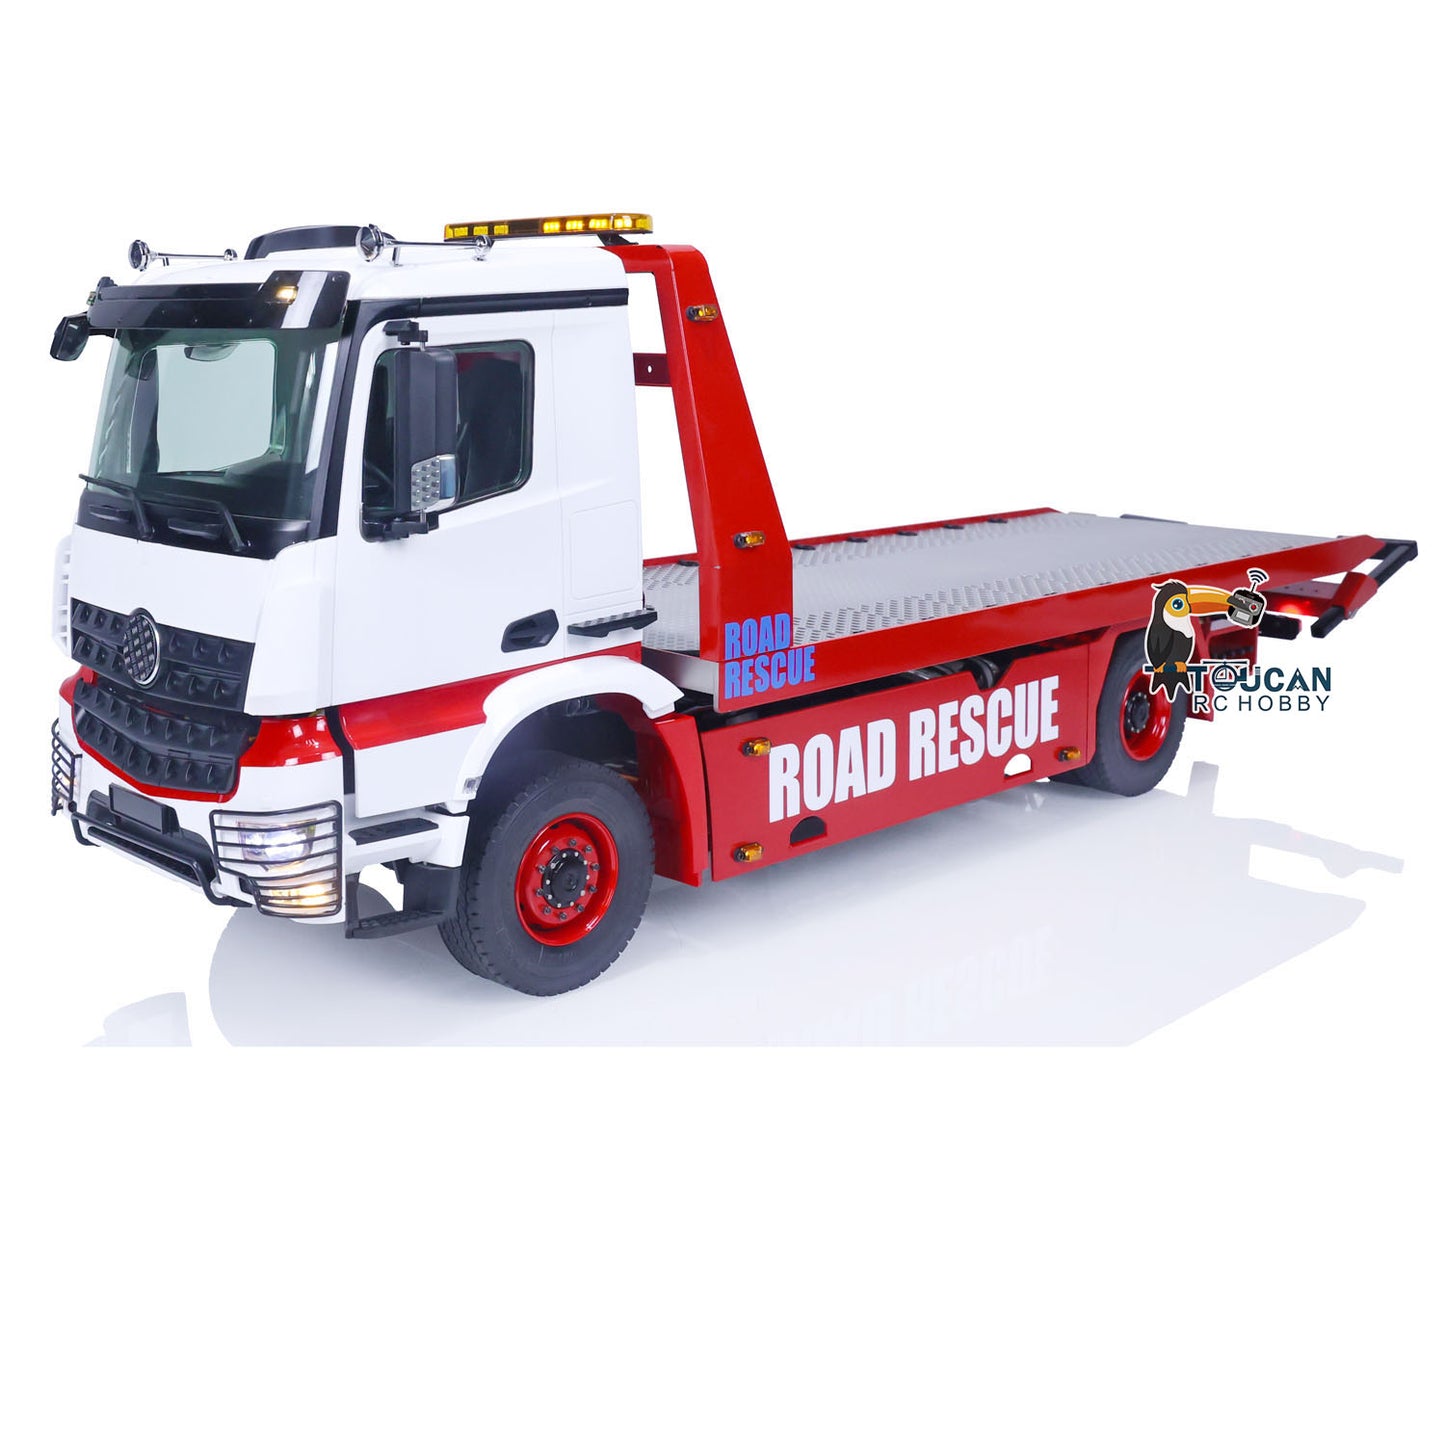 IN STOCK JDM 1/14 4x4 Metal Assembled and Painted RC Hydraulic Flatbed Tow Truck JDM-196 Recovery Vehicle Wrecker Car Models 3Speed Transmission